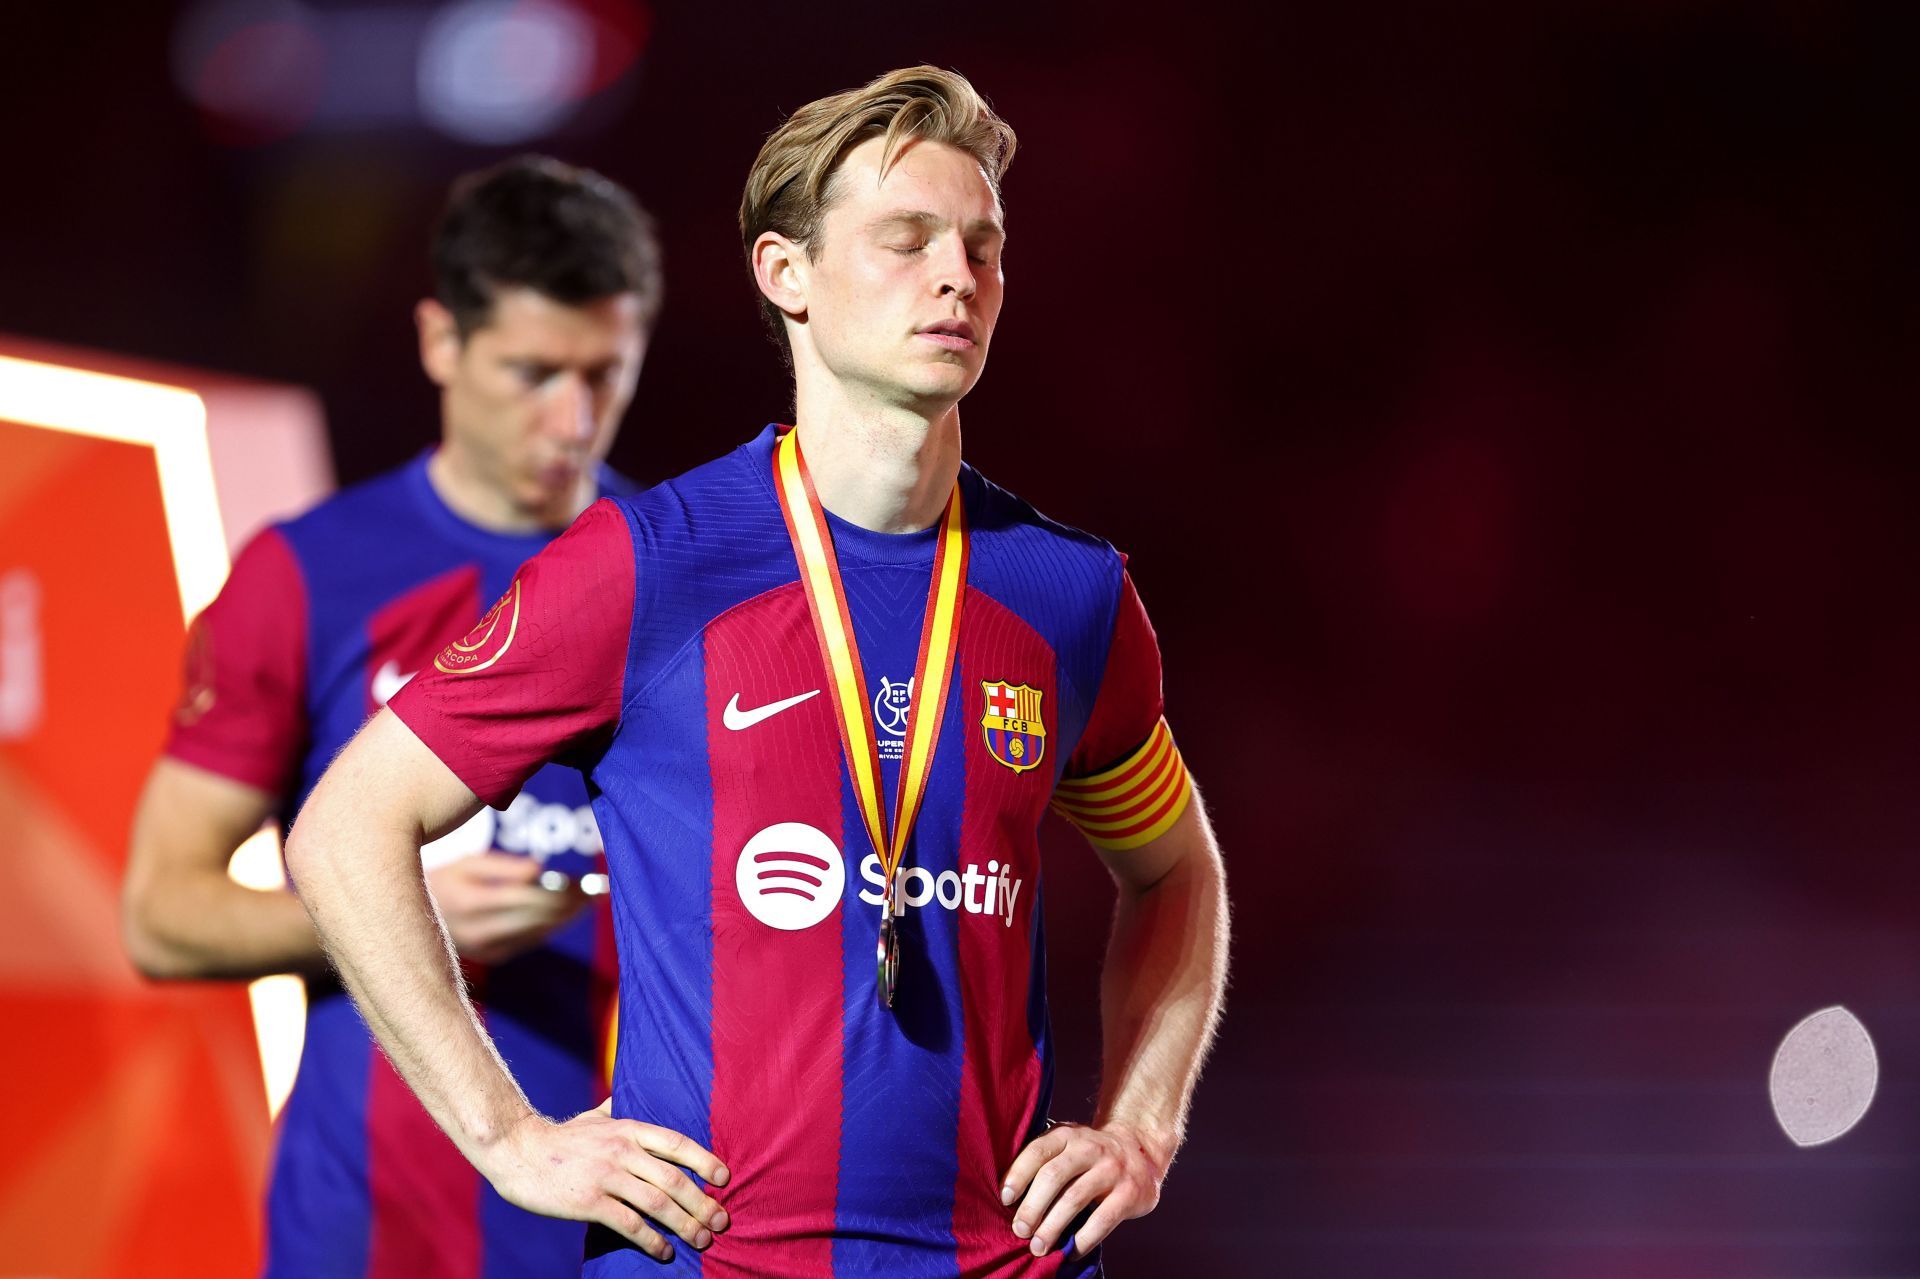 Frenkie de Jong&rsquo;s time at the Camp Nou could be coming to an end.